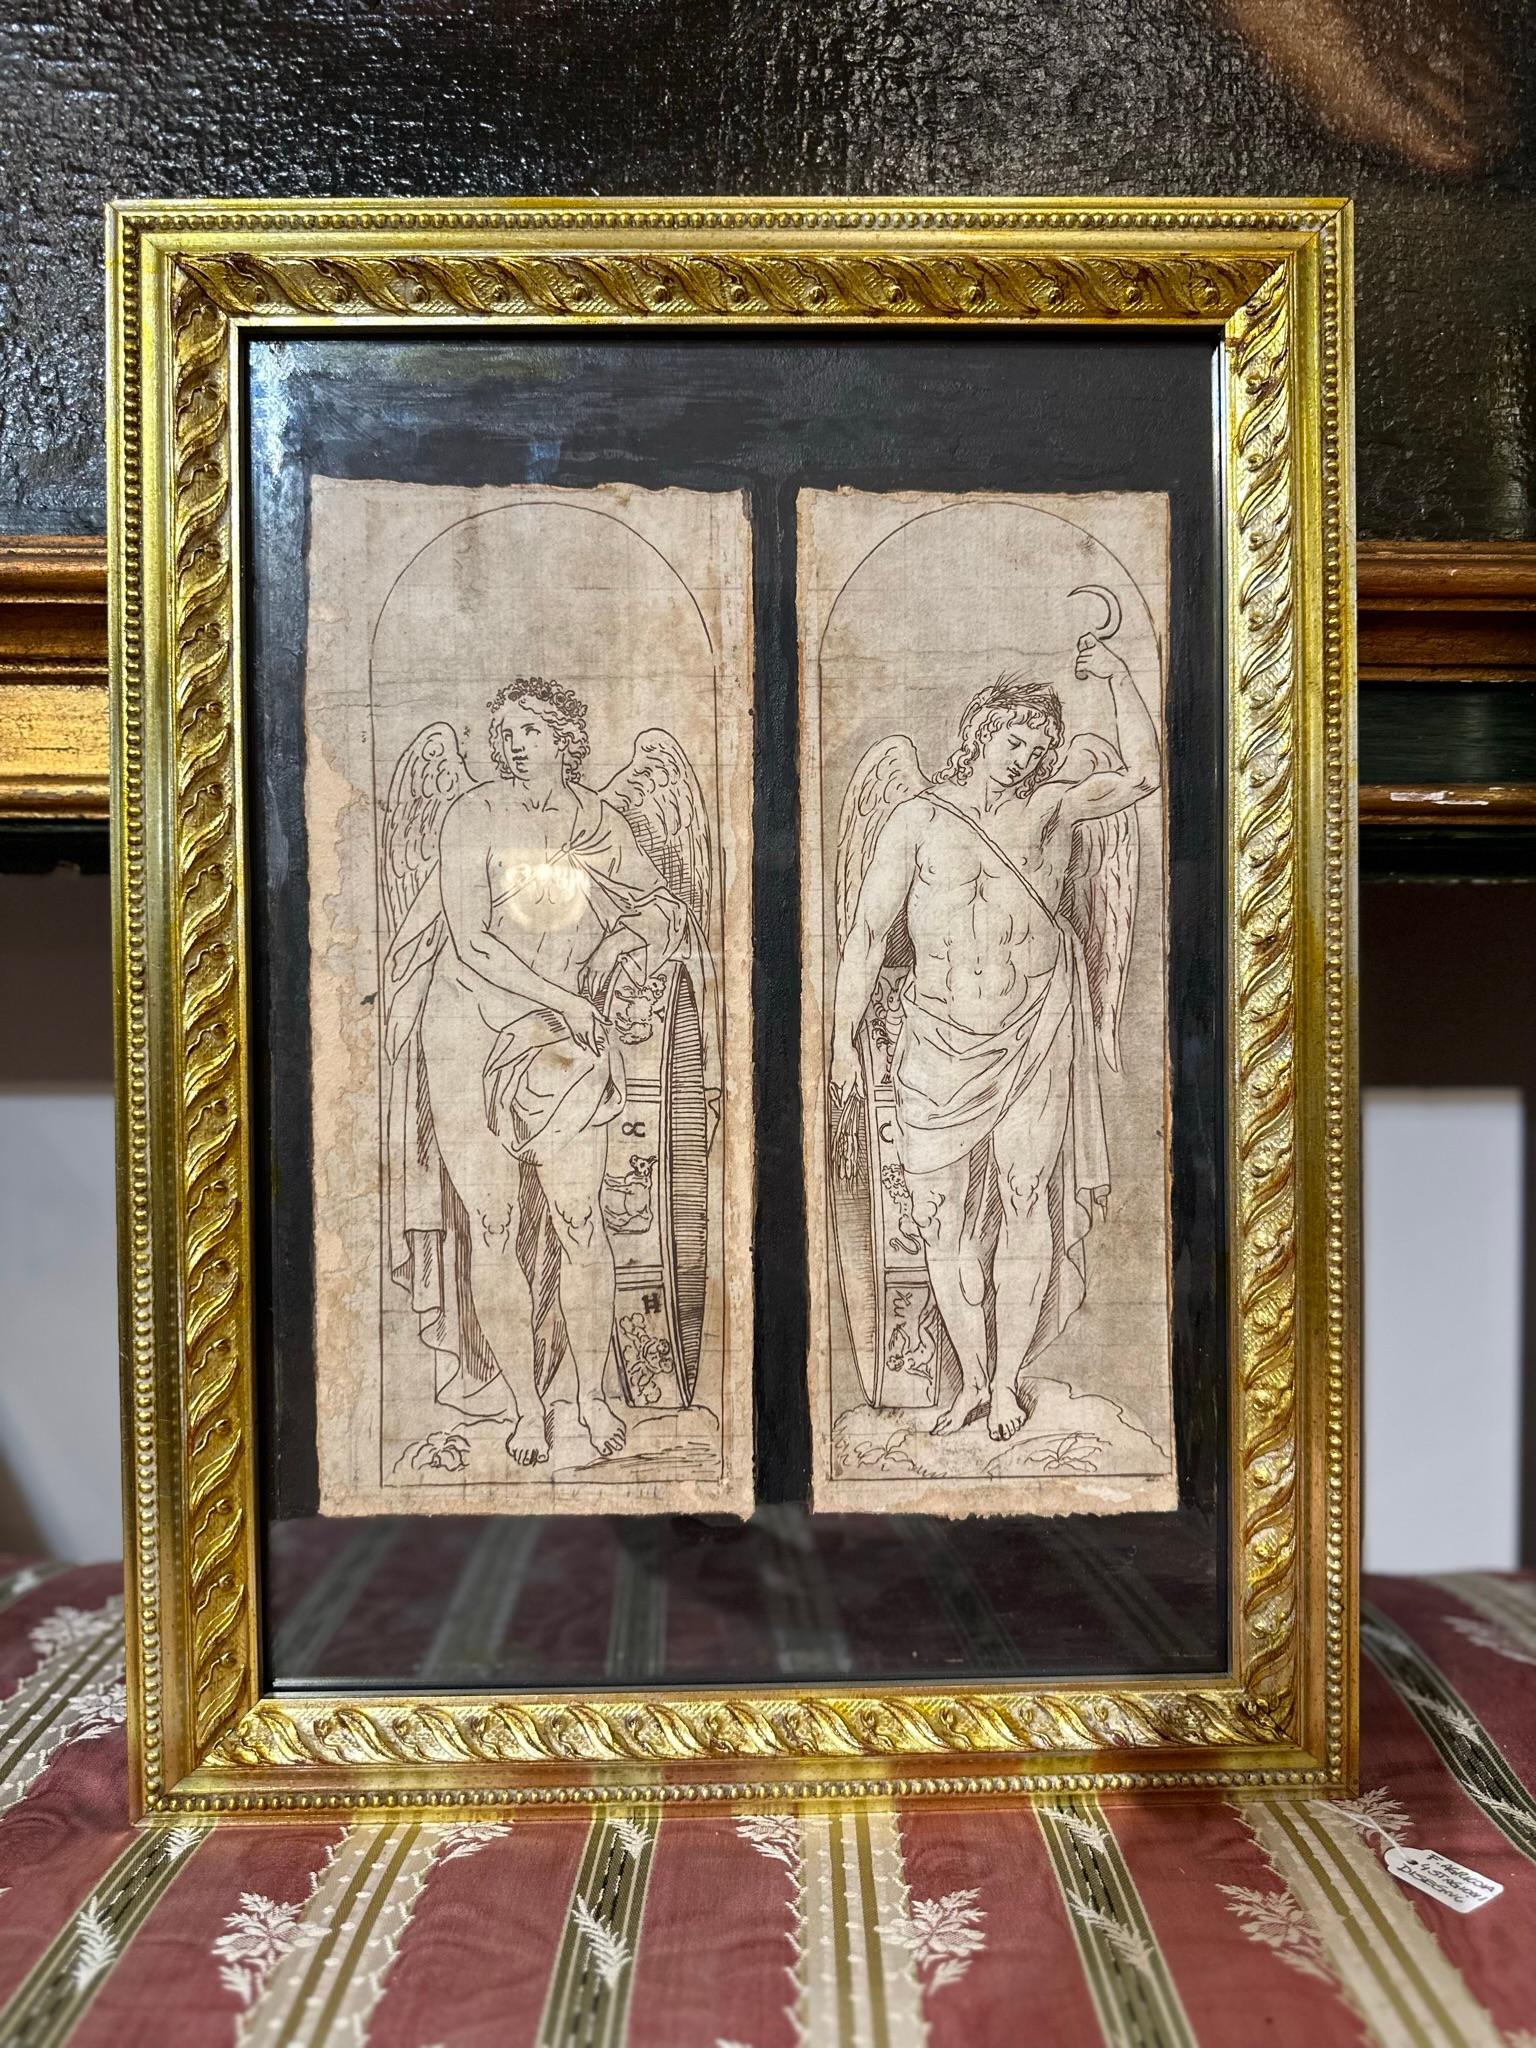 Neoclassical Revival 18th Century neoclassical sketches with seasons allegory For Sale